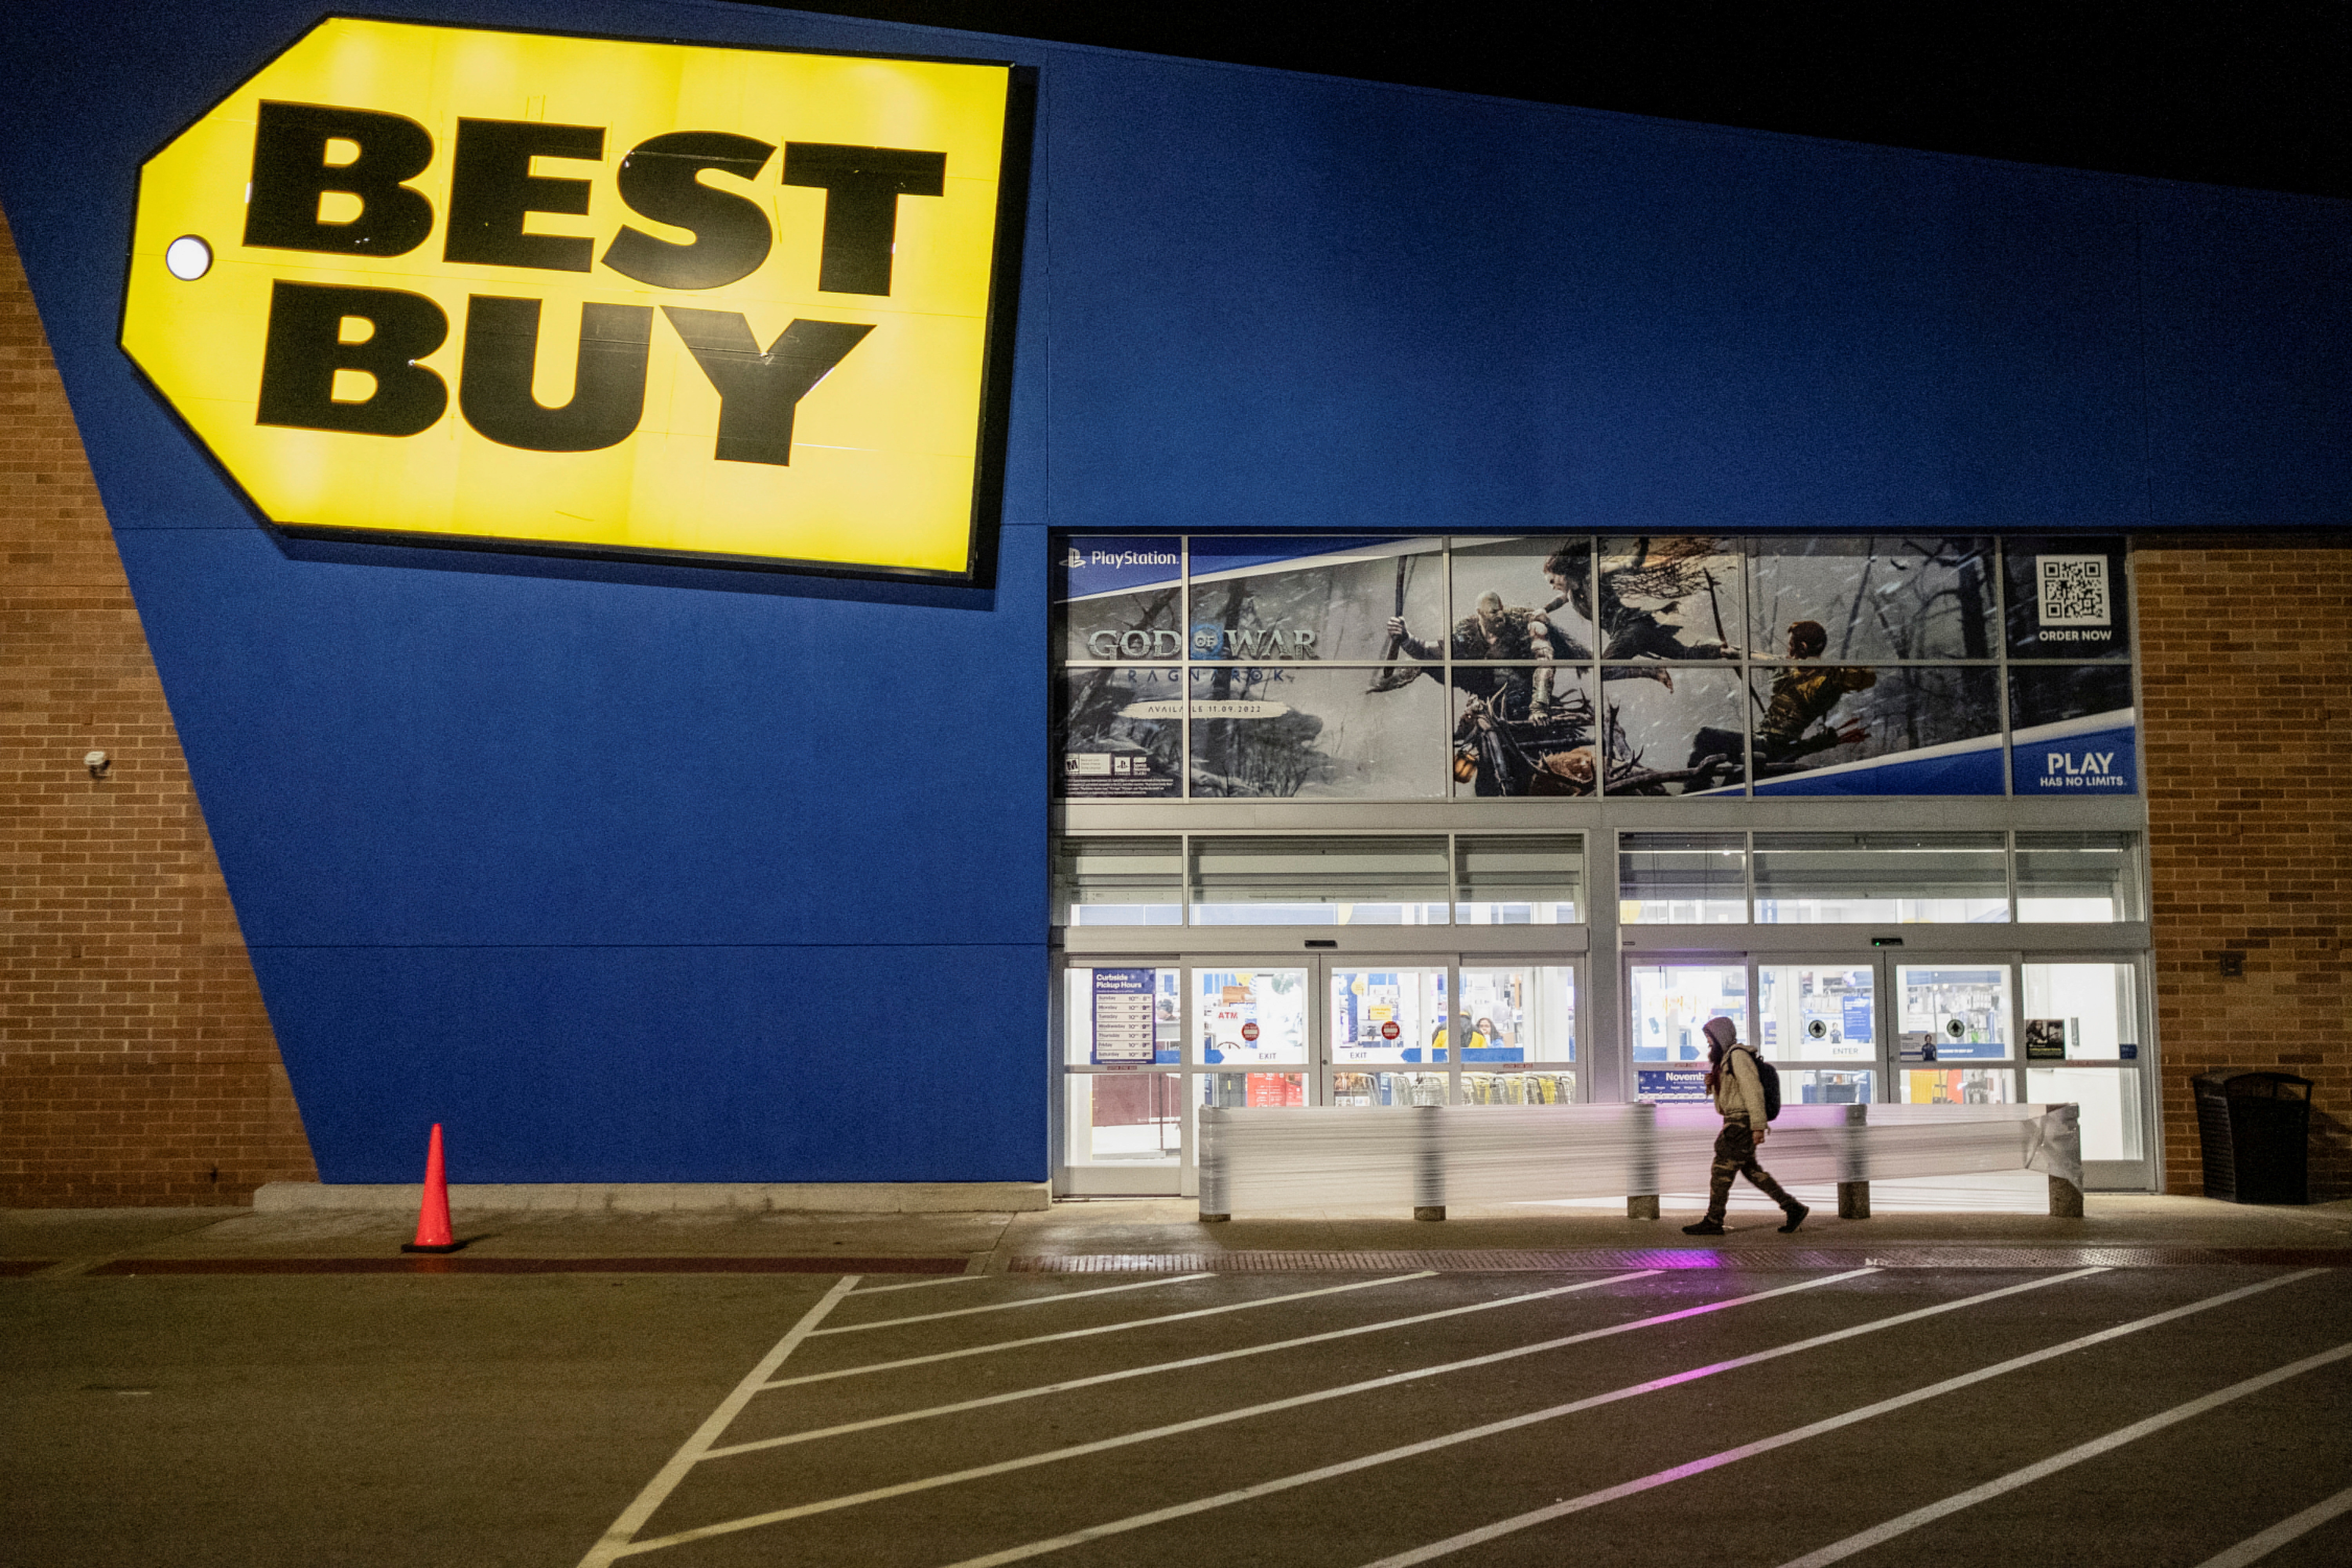 Best Buy, Walmart, other major US retailers tout health services